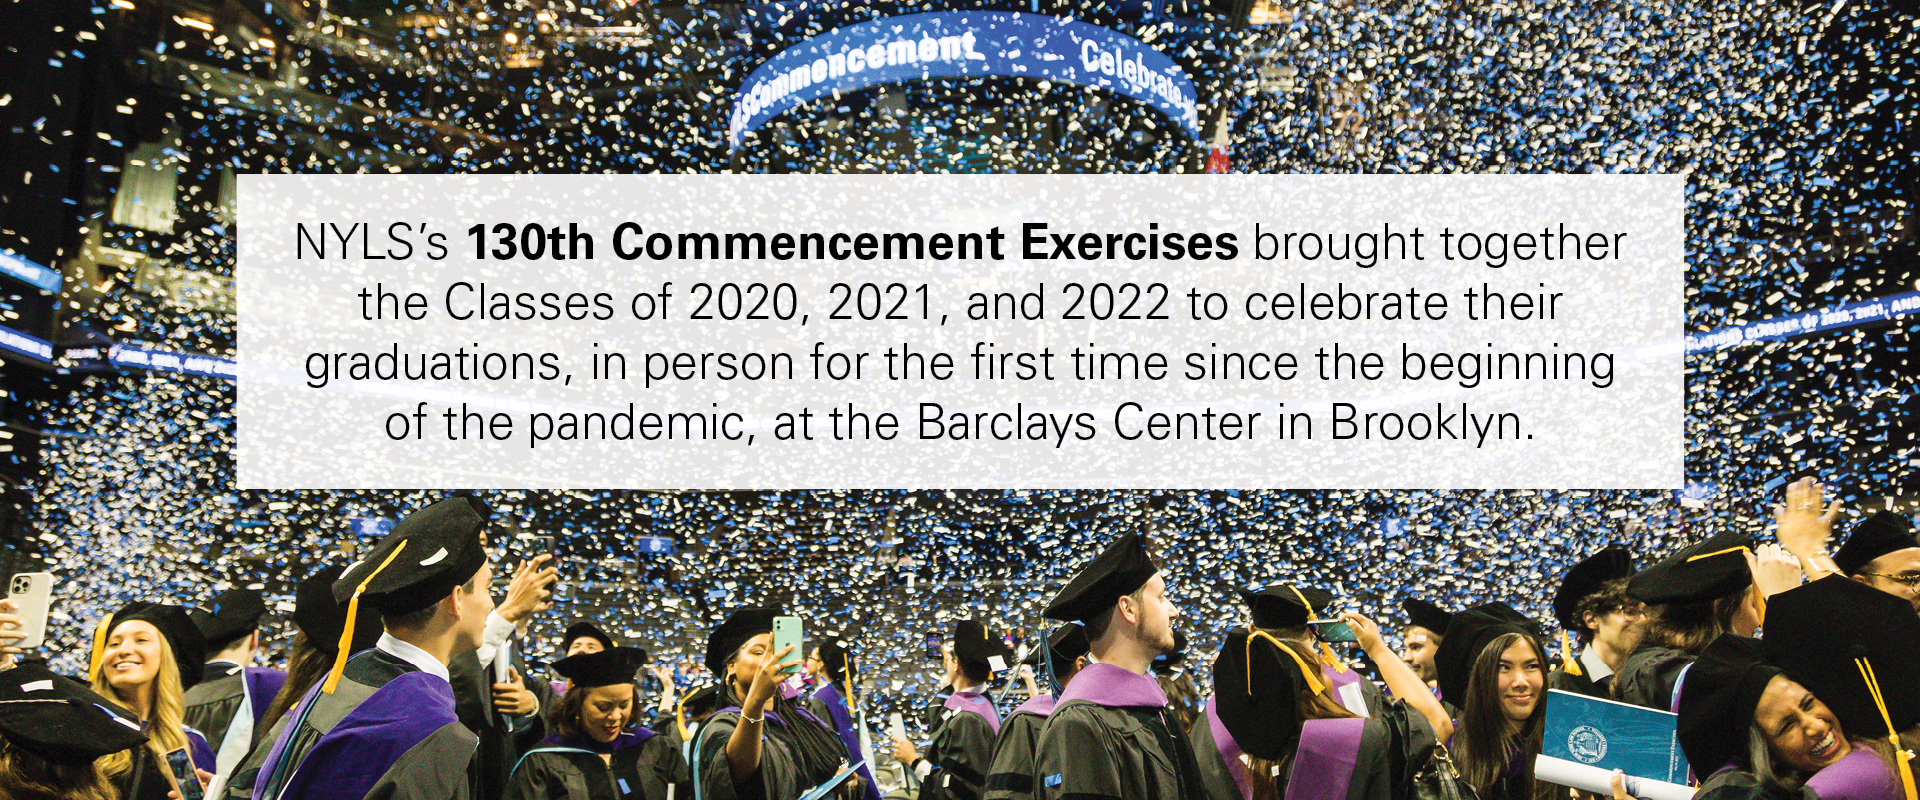 NYLS’s 130th Commencement Exercises brought together the Classes of 2020, 2021, and 2022 to celebrate their graduations, in person for the first time since the beginning of the pandemic, at the Barclays Center in Brooklyn.